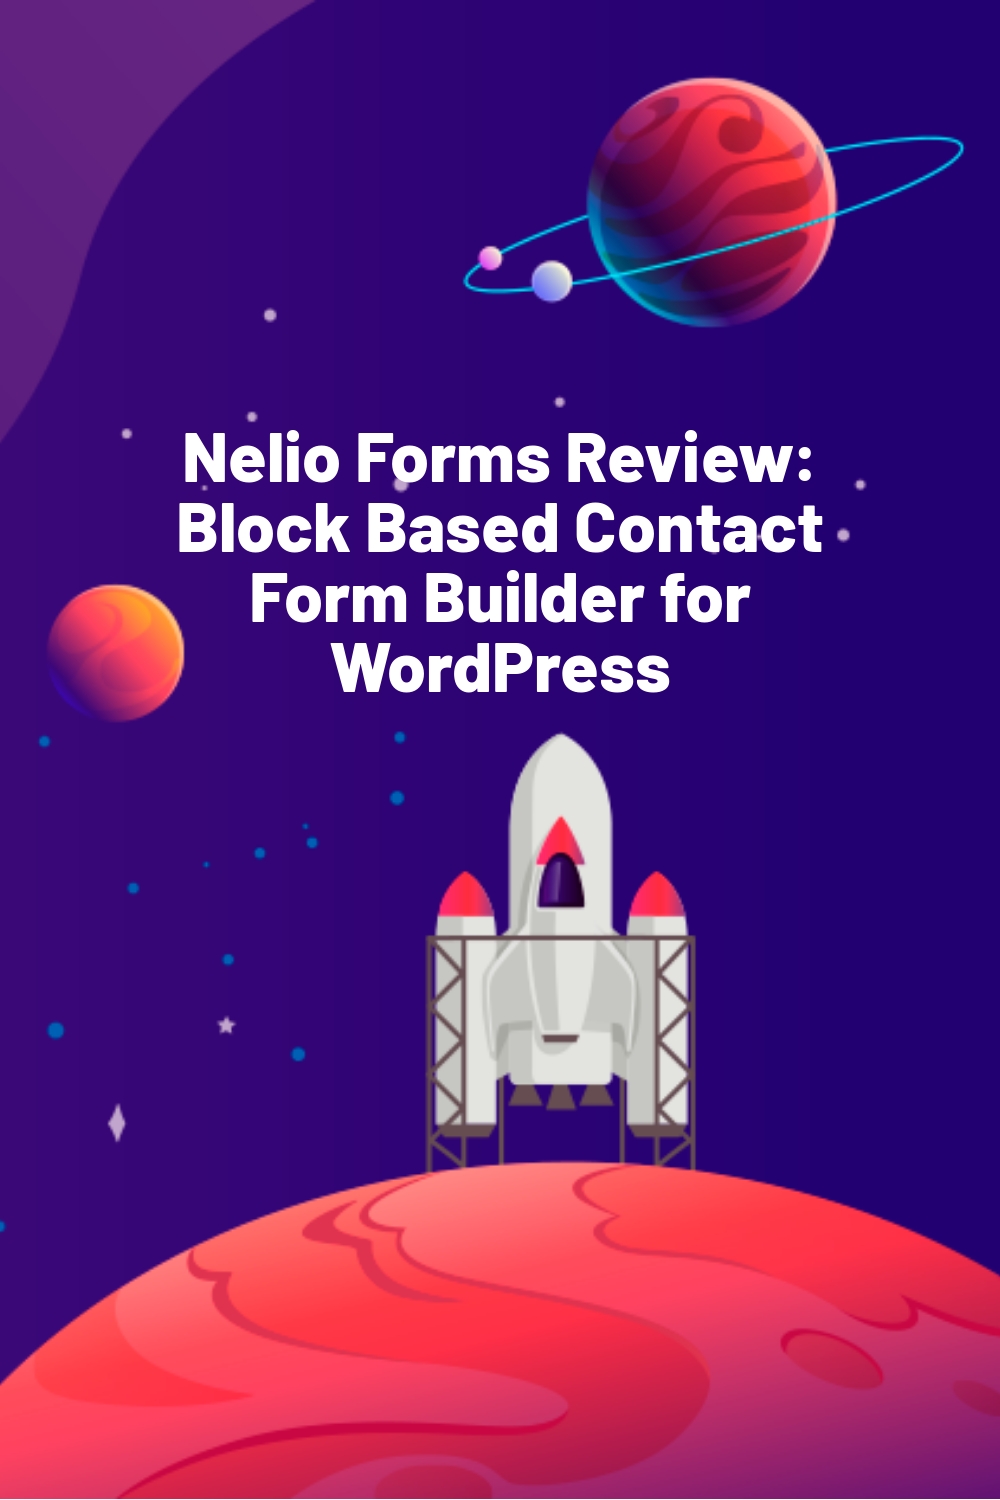 Nelio Forms Review: Block Based Contact Form Builder for WordPress